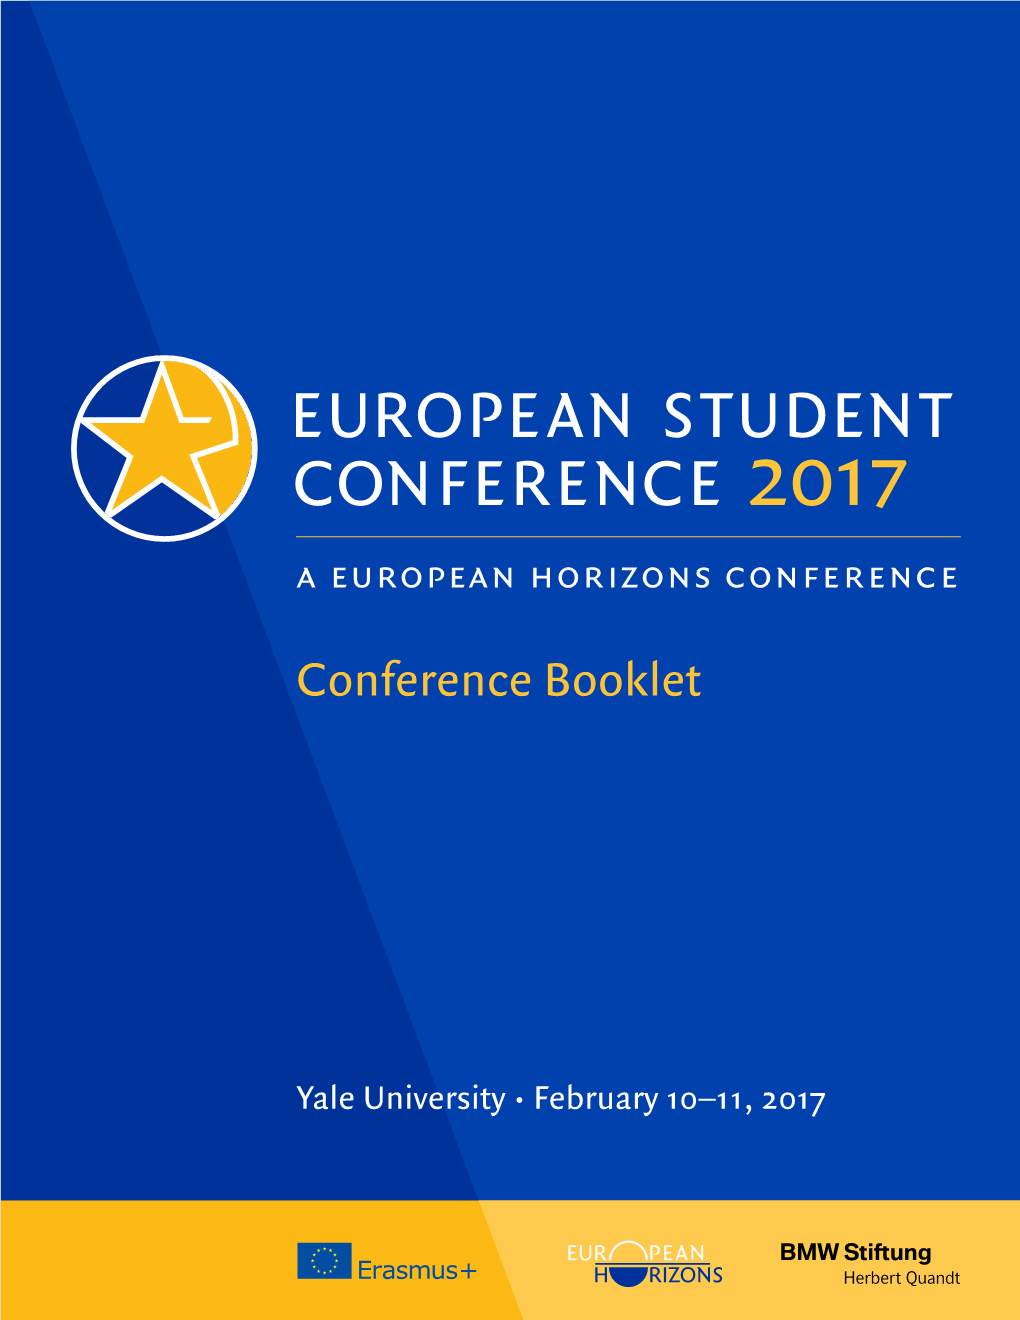 EUROPEAN STUDENT CONFERENCE 2017 a European Horizons Conference